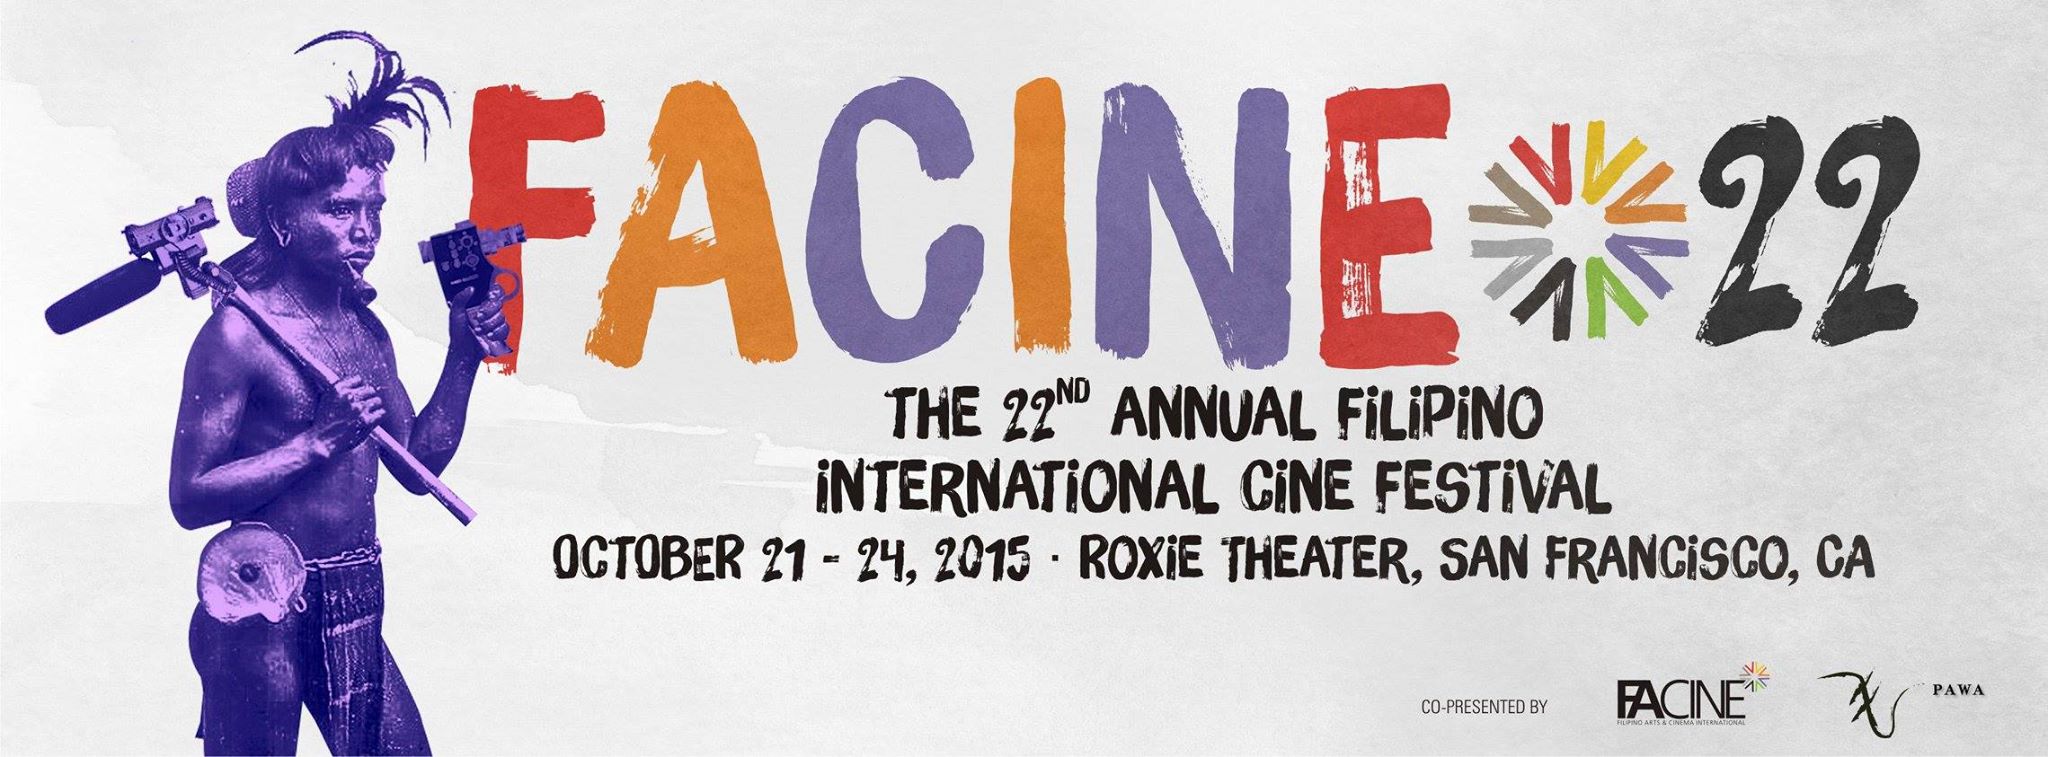 FACINE 22nd Annual Filipino International Cine Festival October 21 - October 24 Oct 21 at 7:00pm to Oct 24 at 11:00pm in PDT Show Map Roxie Theatre 3117 16th St, San Francisco, California 94103 Created for FACINE | Filipino Arts & Cinema, International FACINE, in its 22 years, will hold the FACINE 22nd Annual Filipino International Cine Festival at the Roxie Theatre in San Francisco on October 21-24. Discover. Explore. Celebrate Filipino Cinema.